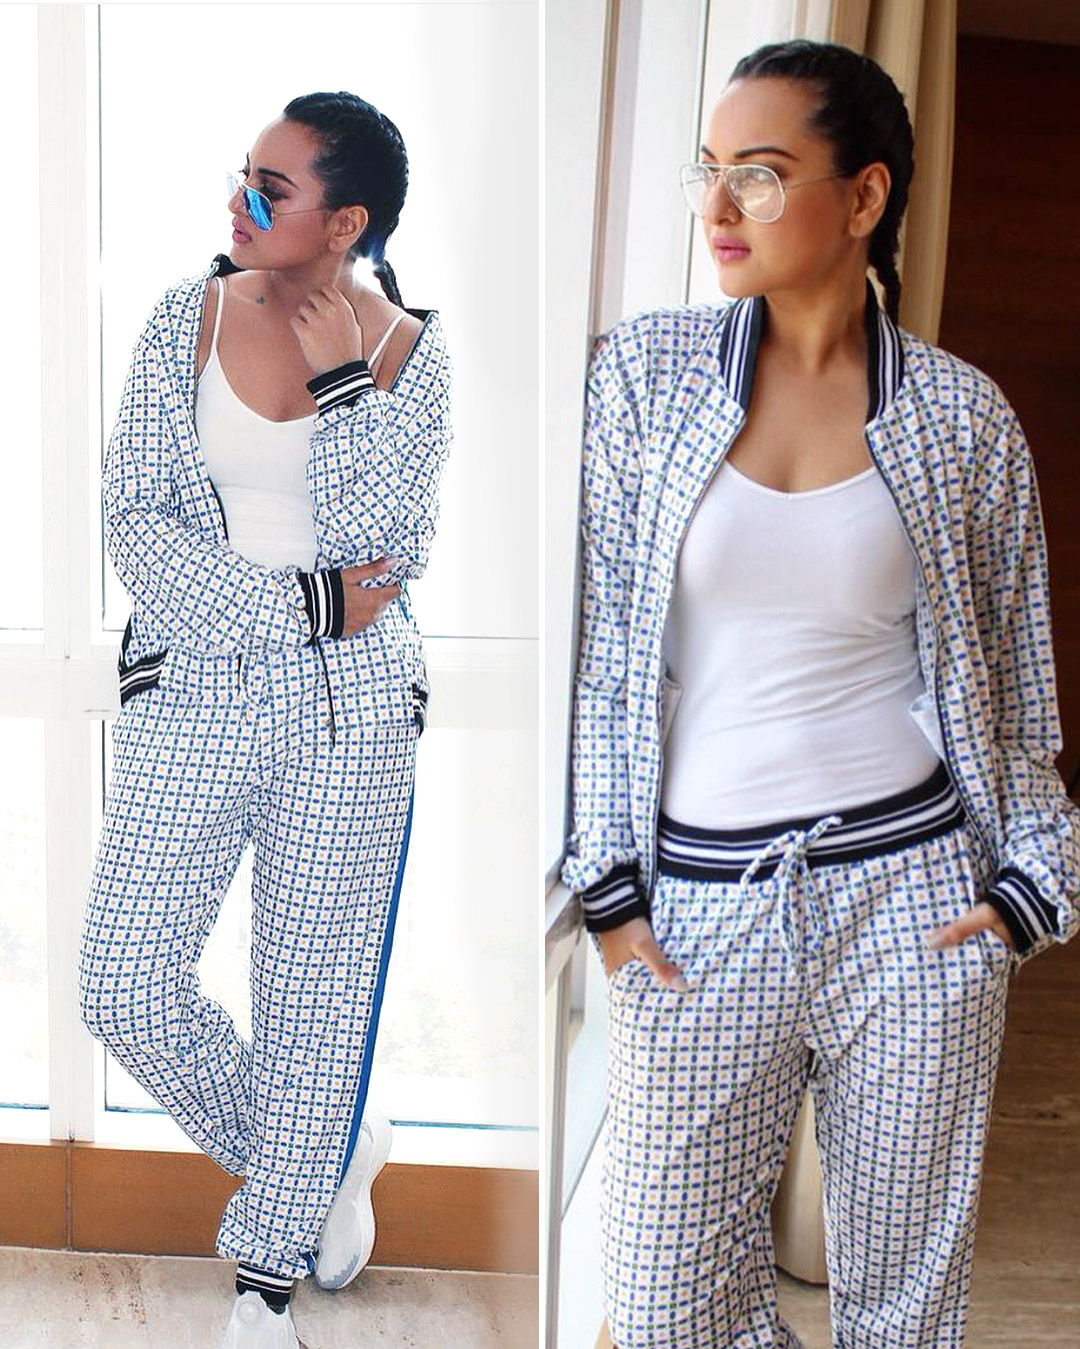 Sonakshi Sinha in a Falguni and Shane Peacock track suit for Welcome to New York Promotions